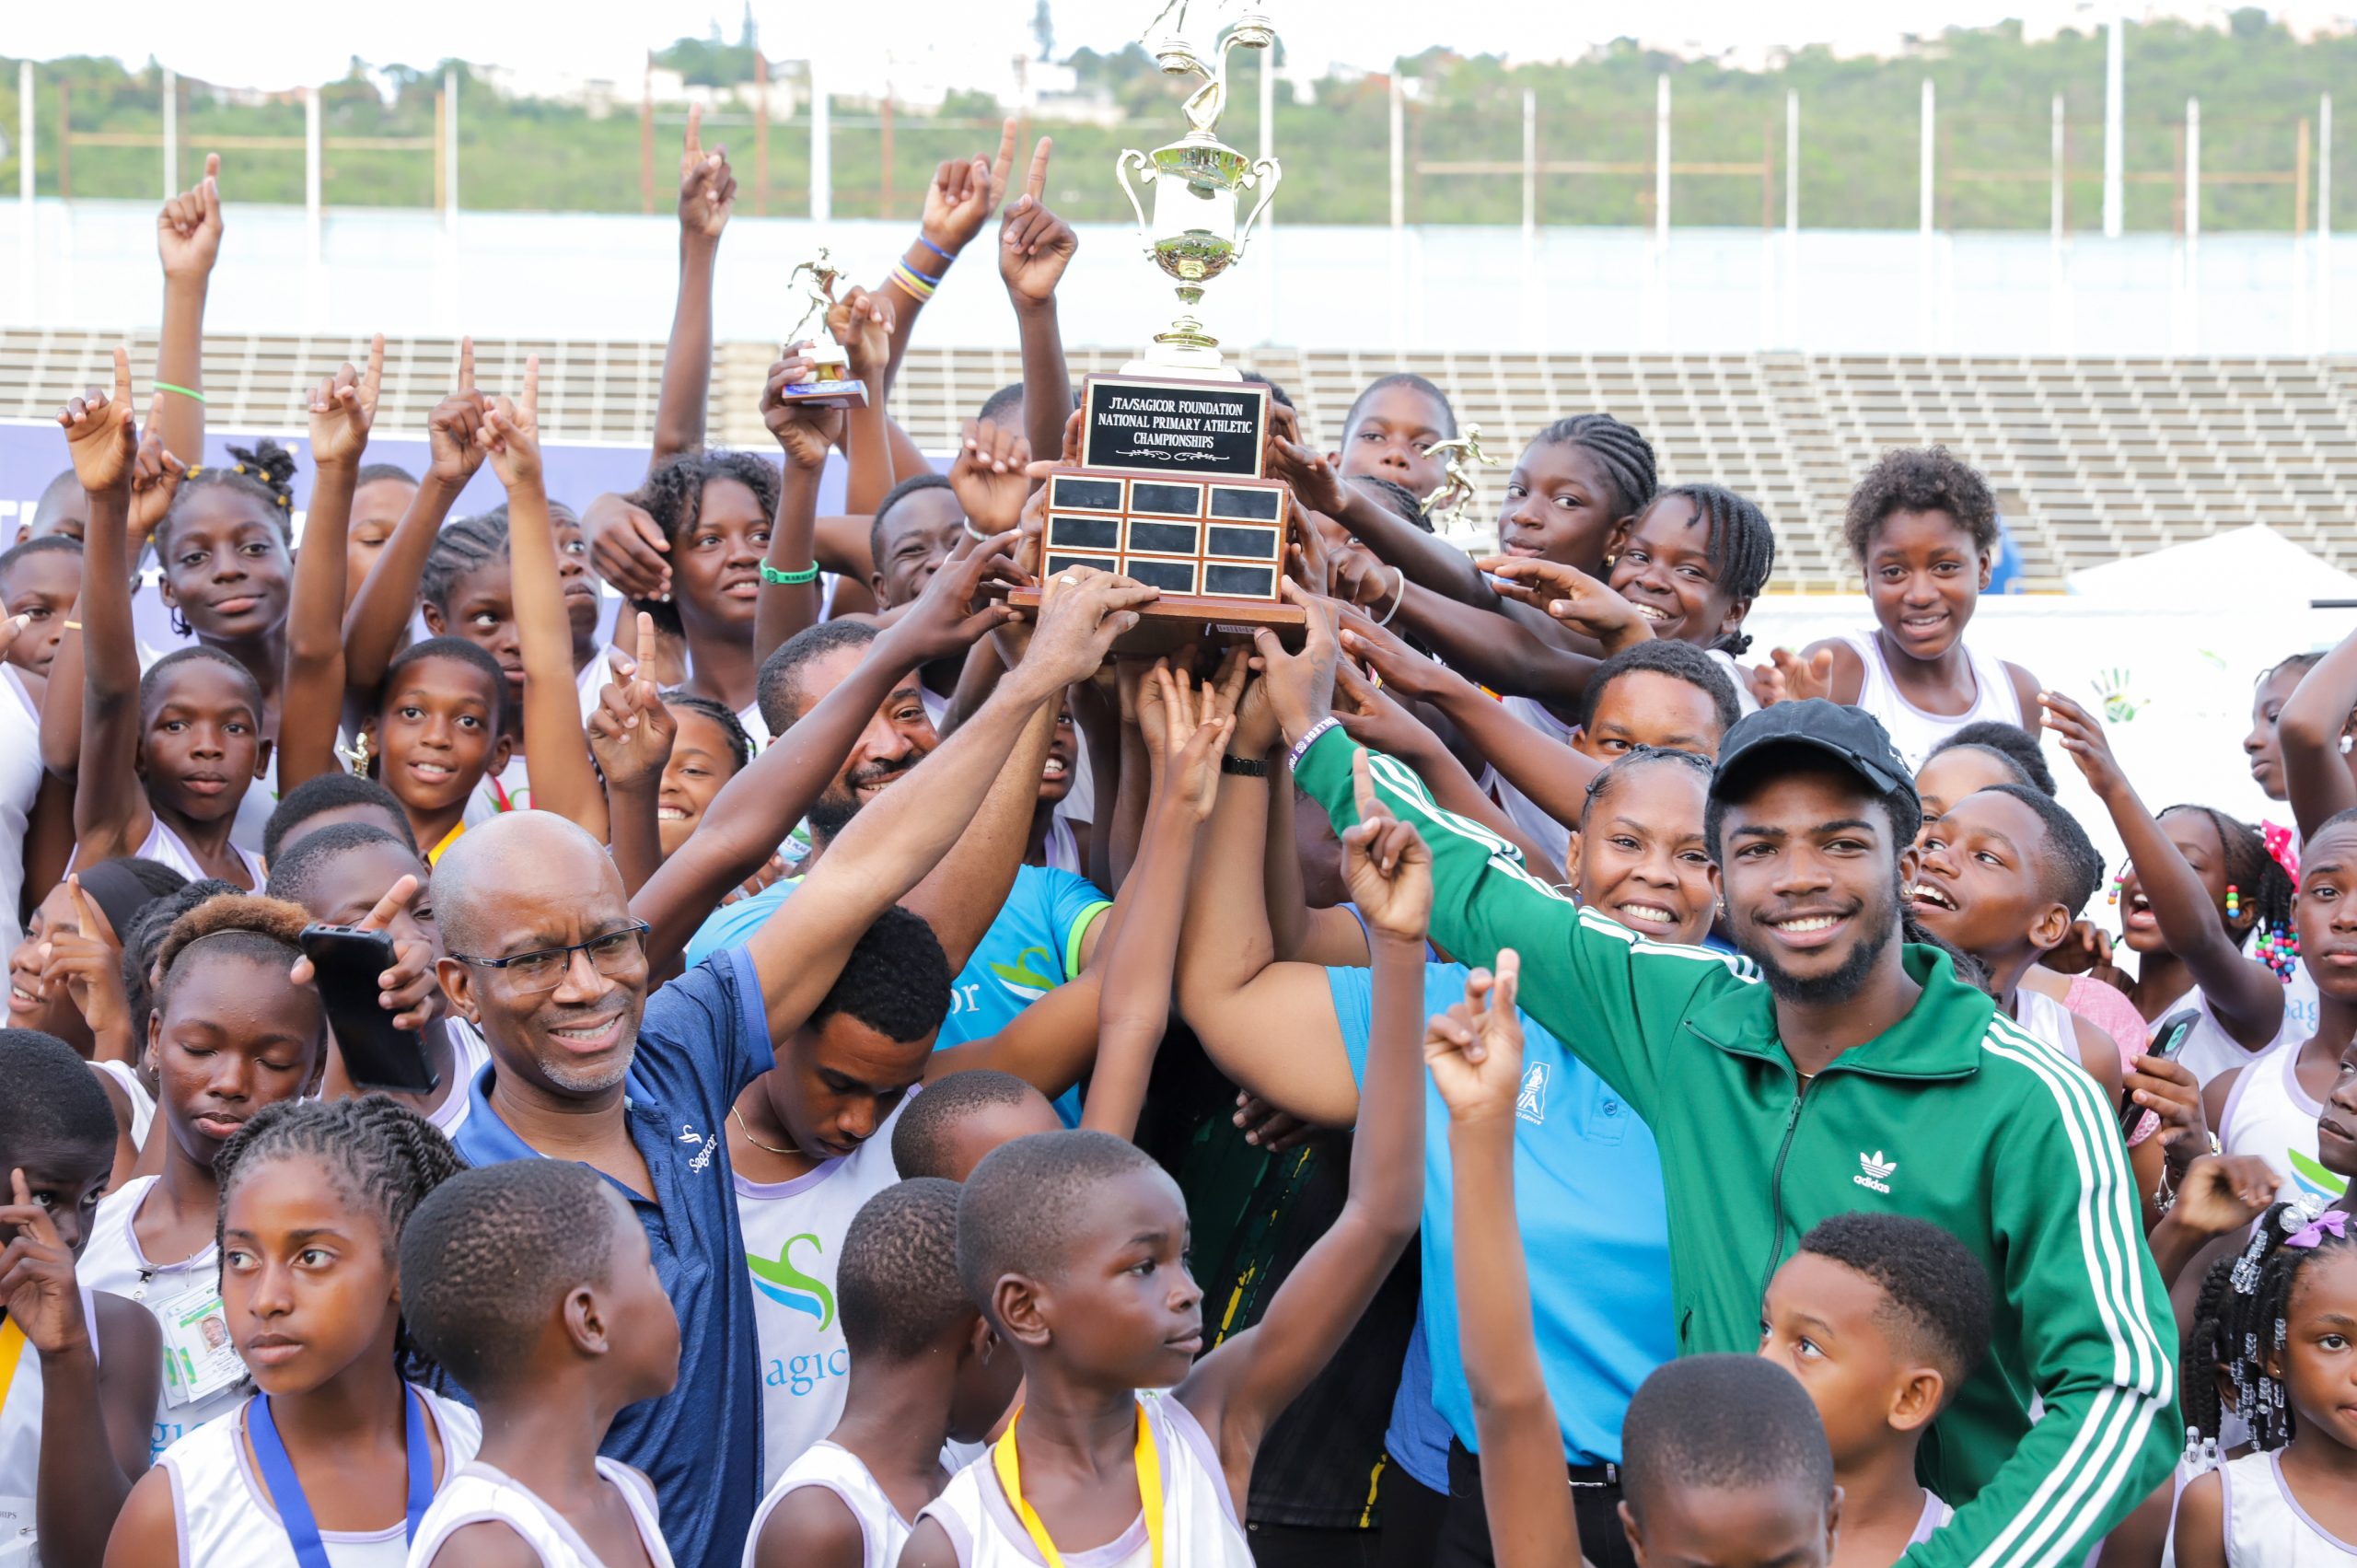 St. Elizabeth lifts the trophy after winning the 38th staging of the JTA/Sagicor National Athletic Championships. With them is Willard Brown, Chief Technology and Insurance Operations Officer, Sagicor Group Jamaica (left) and Bouwahjgie Nkrumie, patron and under 20 100m national record holder.